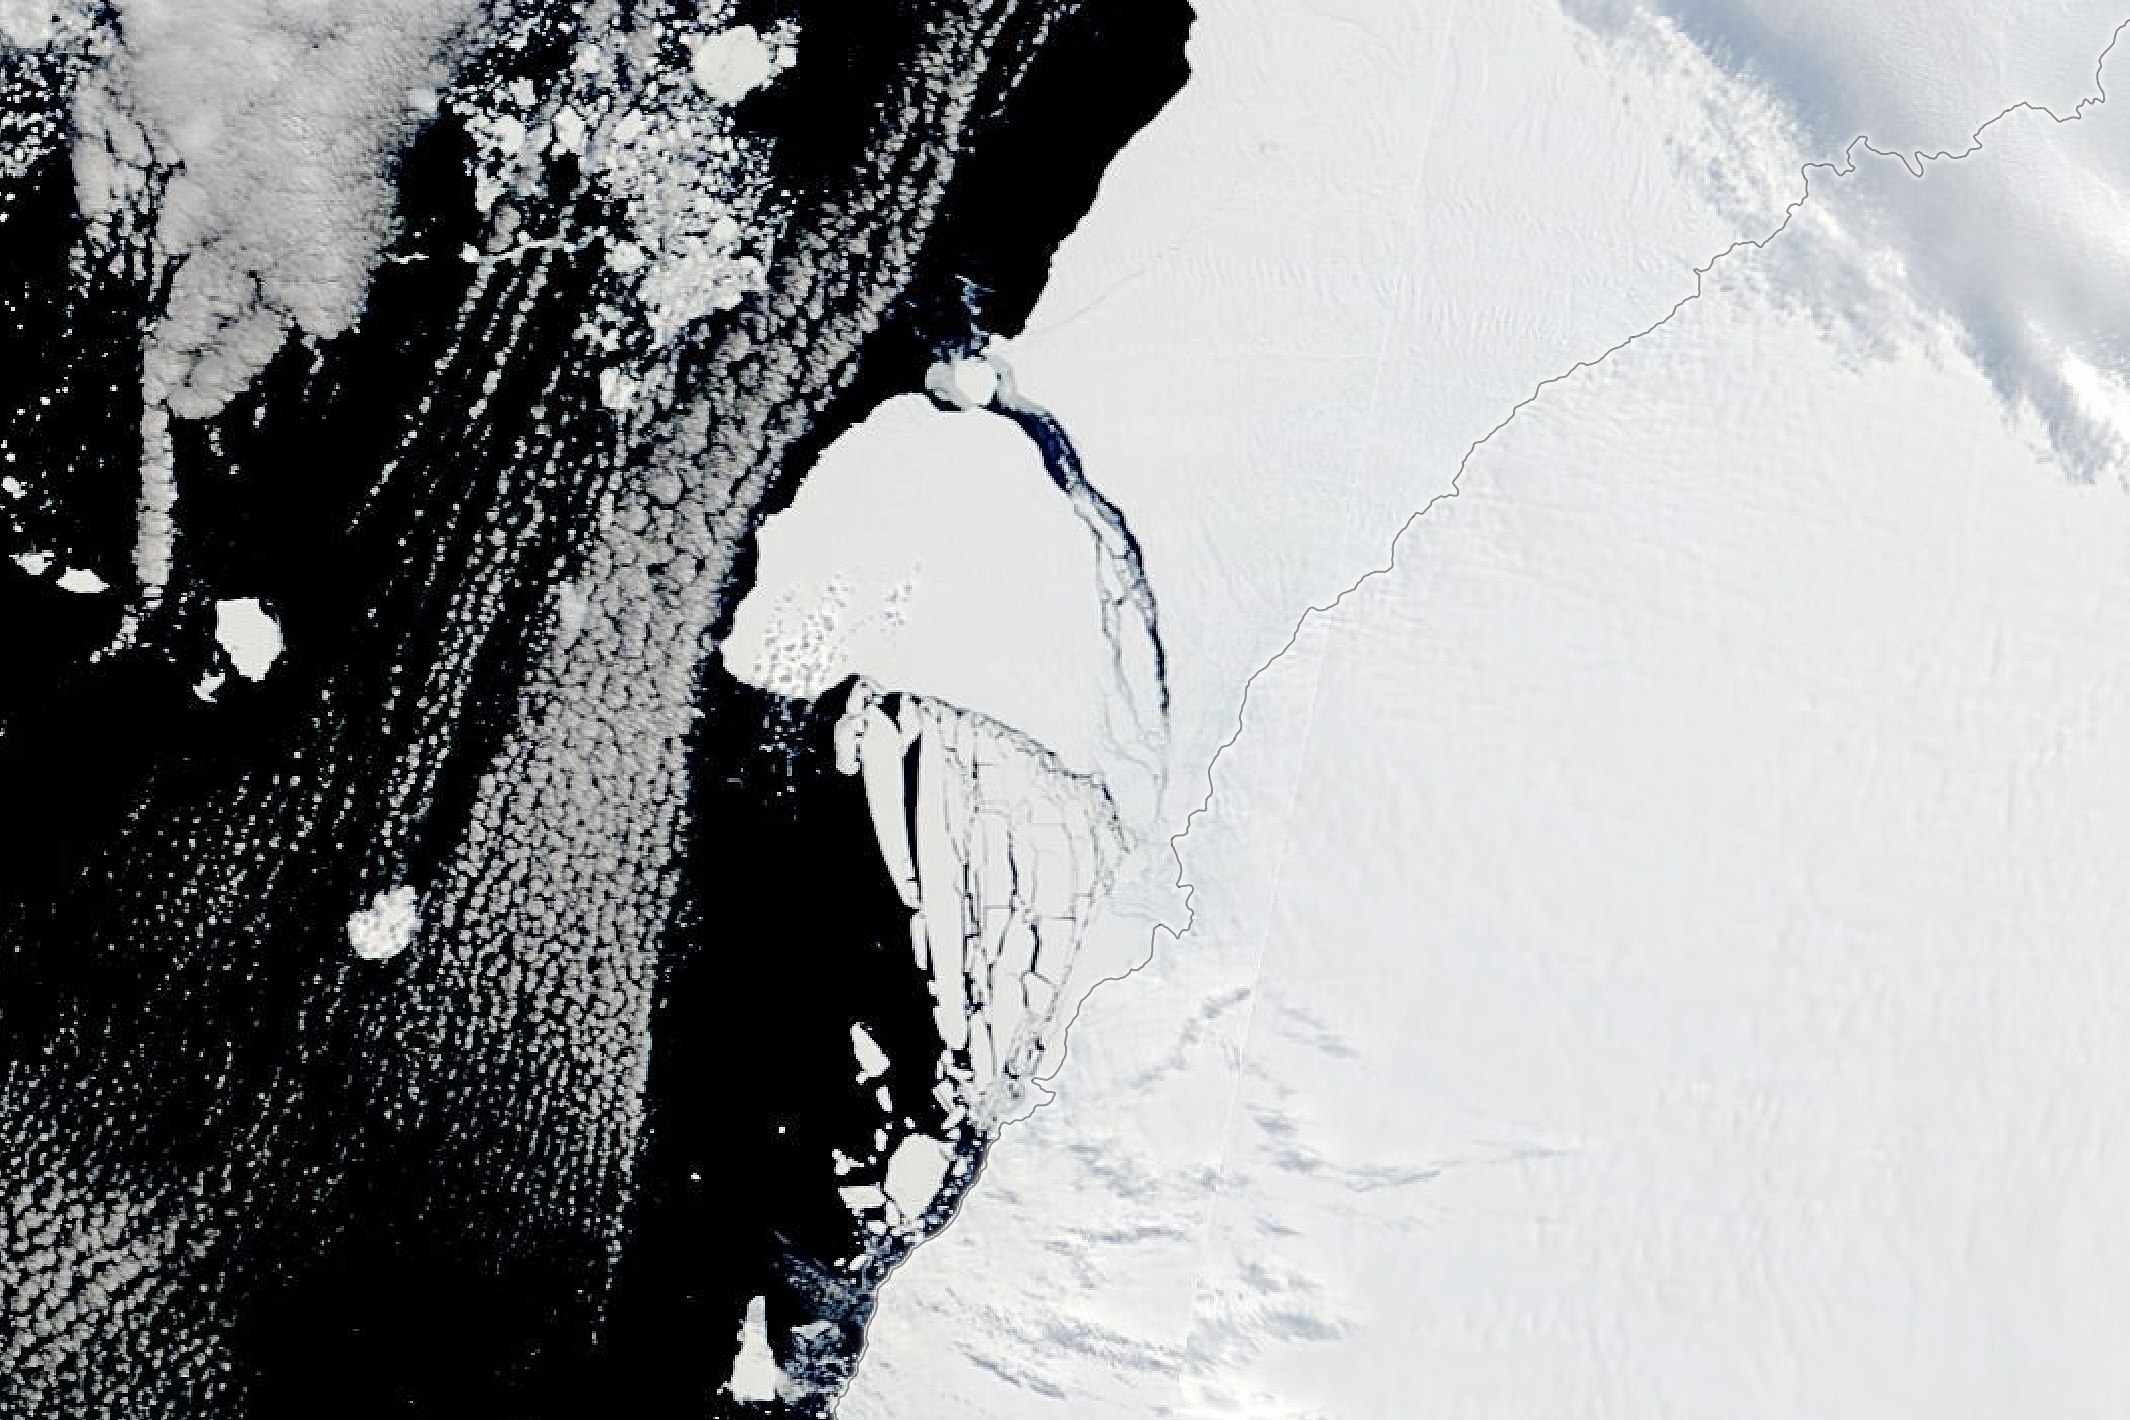 Image of iceberg piece breaking off and floating away from the coast of Antarctica.